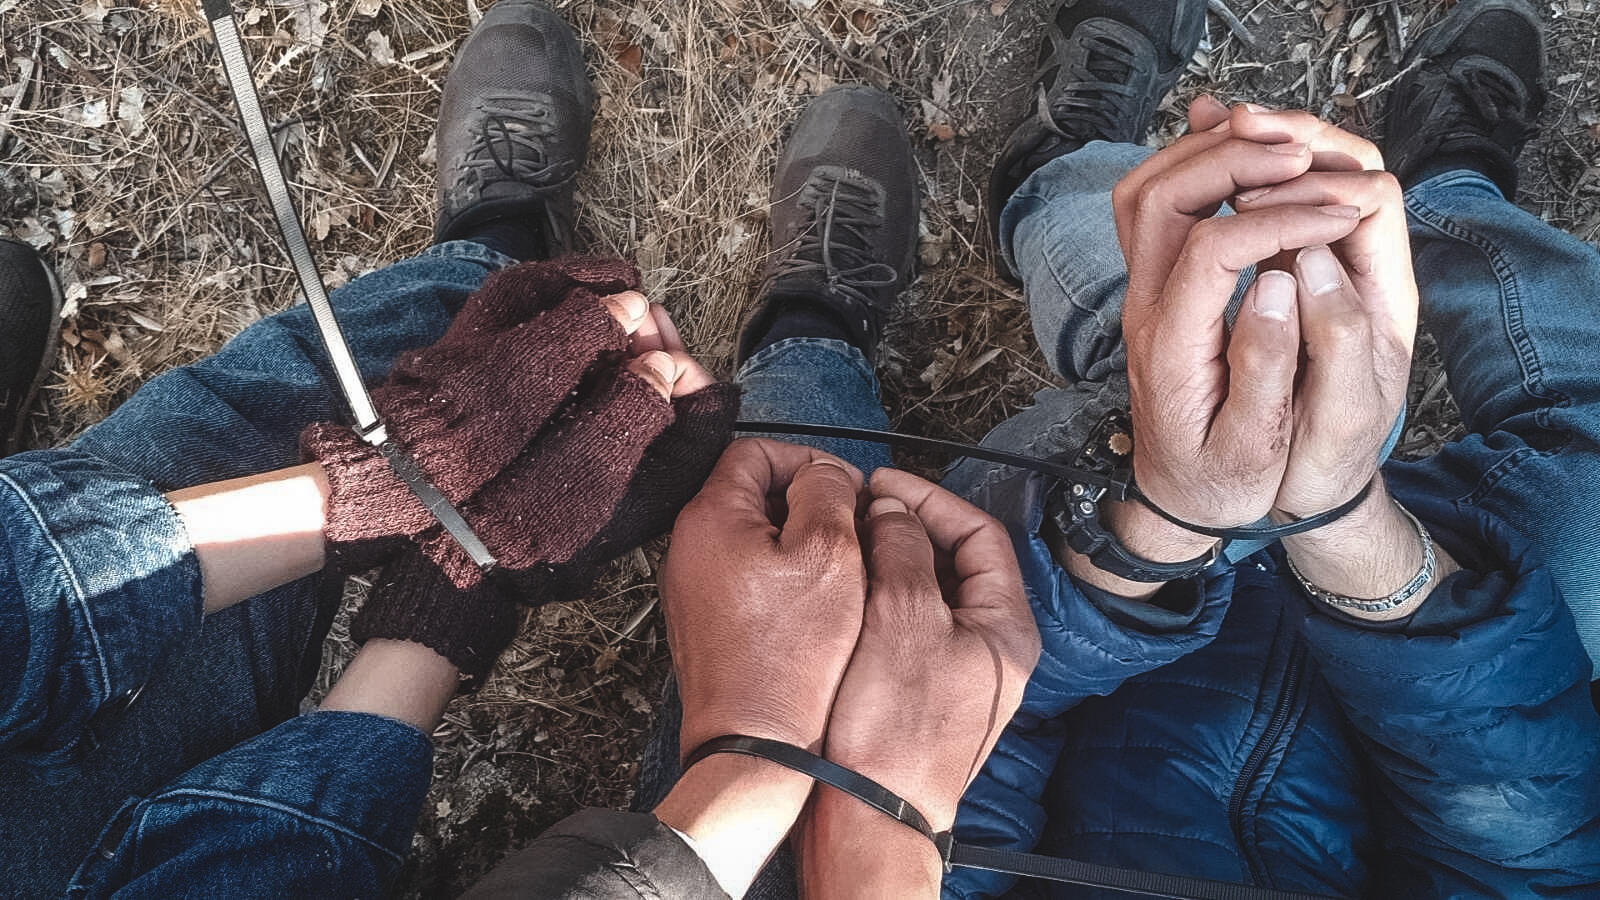 MSF teams found three newly arrived asylum seekers handcuffed during an emergency medical intervention on the Greek island of Lesbos. Greece, 20 October, 2022. © MSF